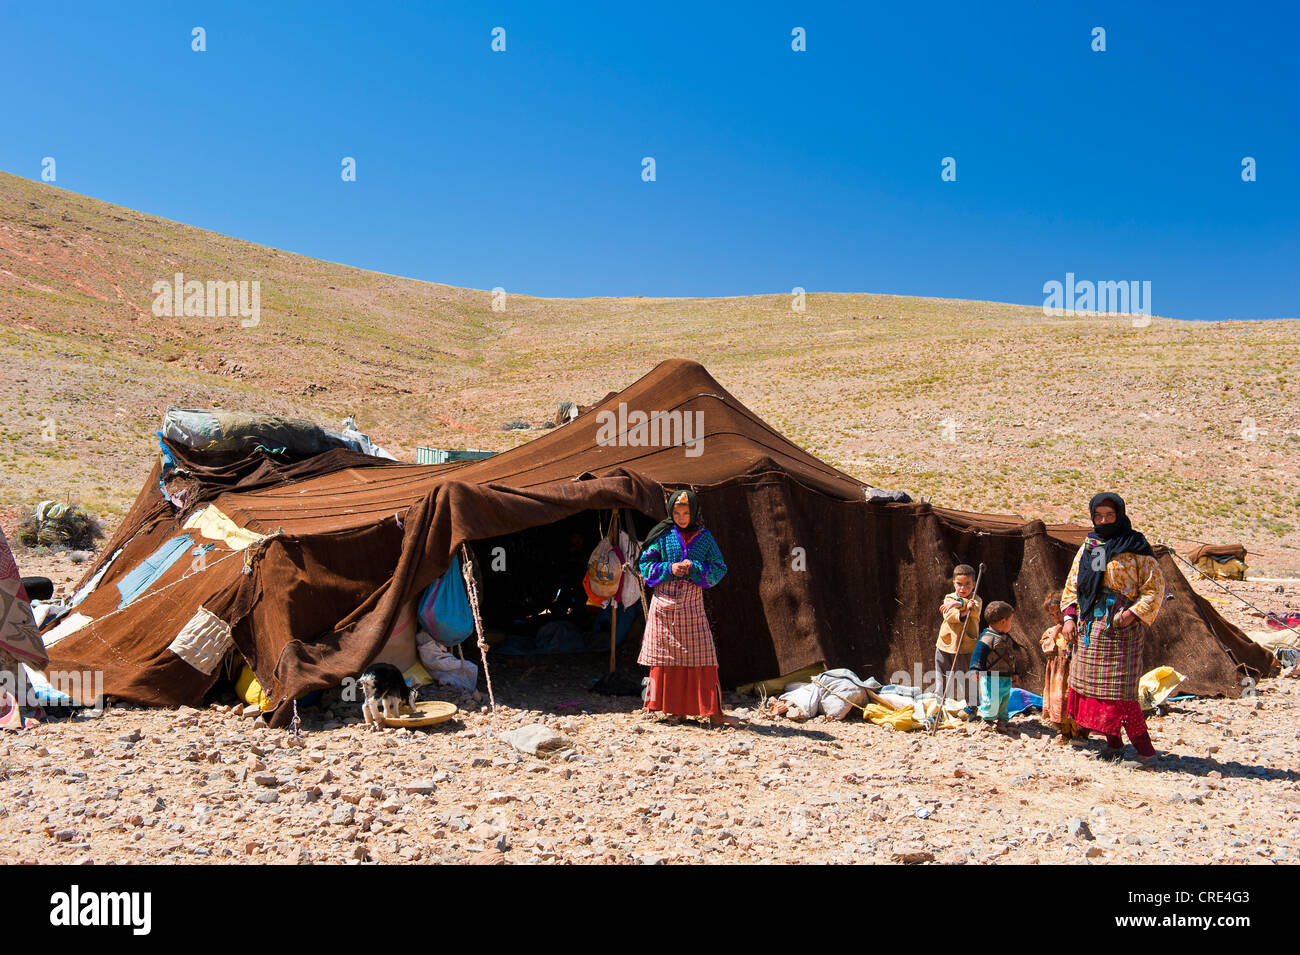 Women and children standing in front of their nomadic tent, Anti-Atlas Mountains, southern Morocco, Morocco, Africa Stock Photo